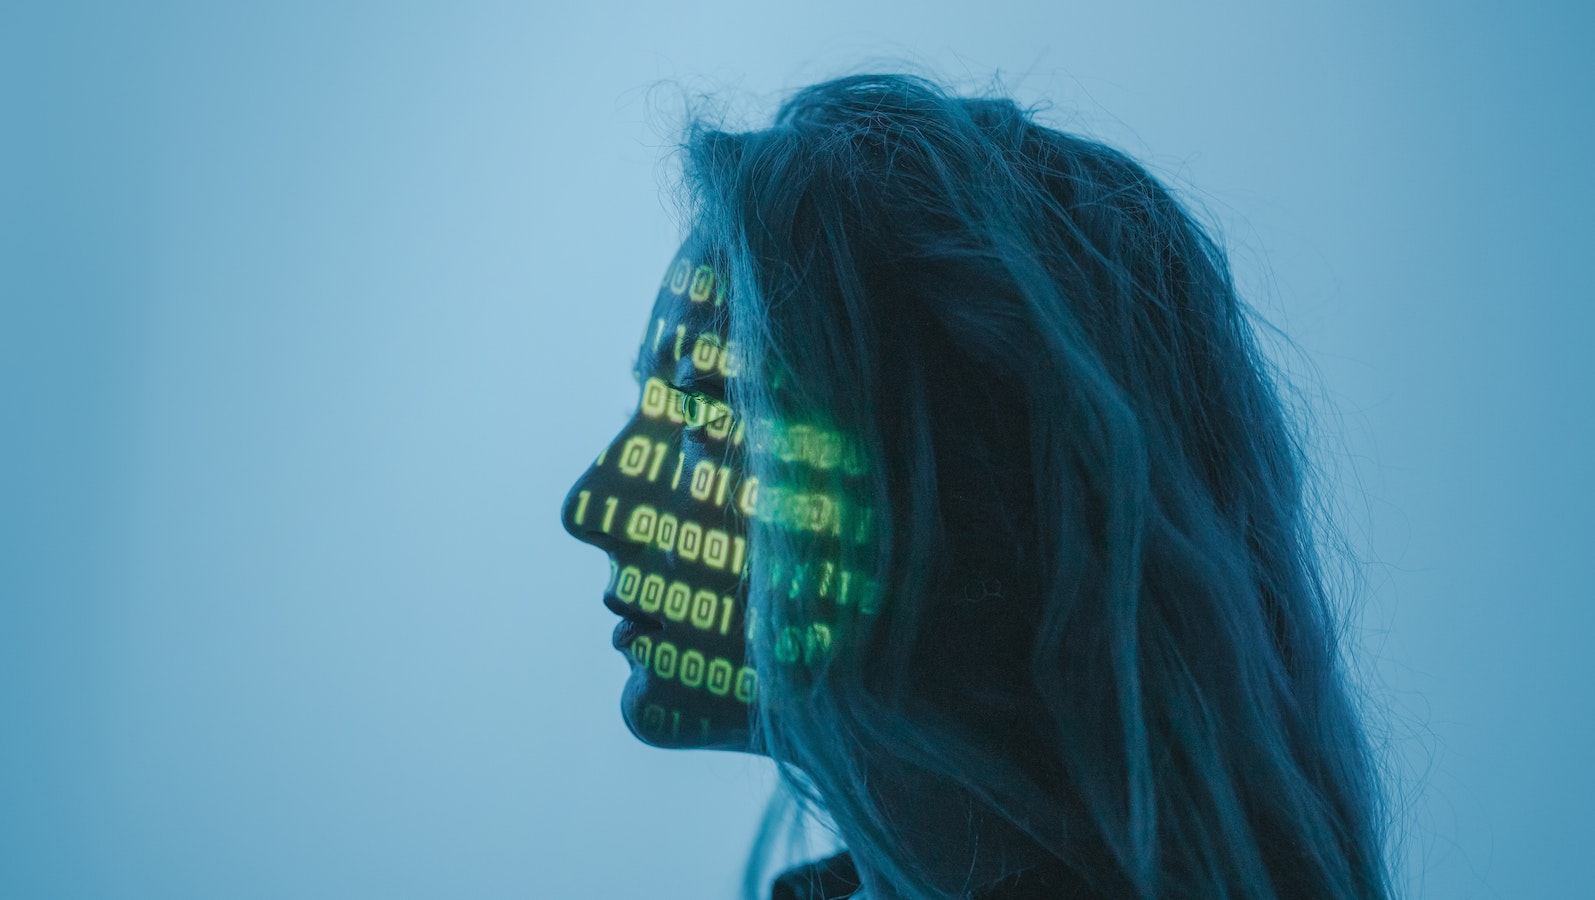 Side profile of a woman against a blue backdrop with binary code lit up across her face